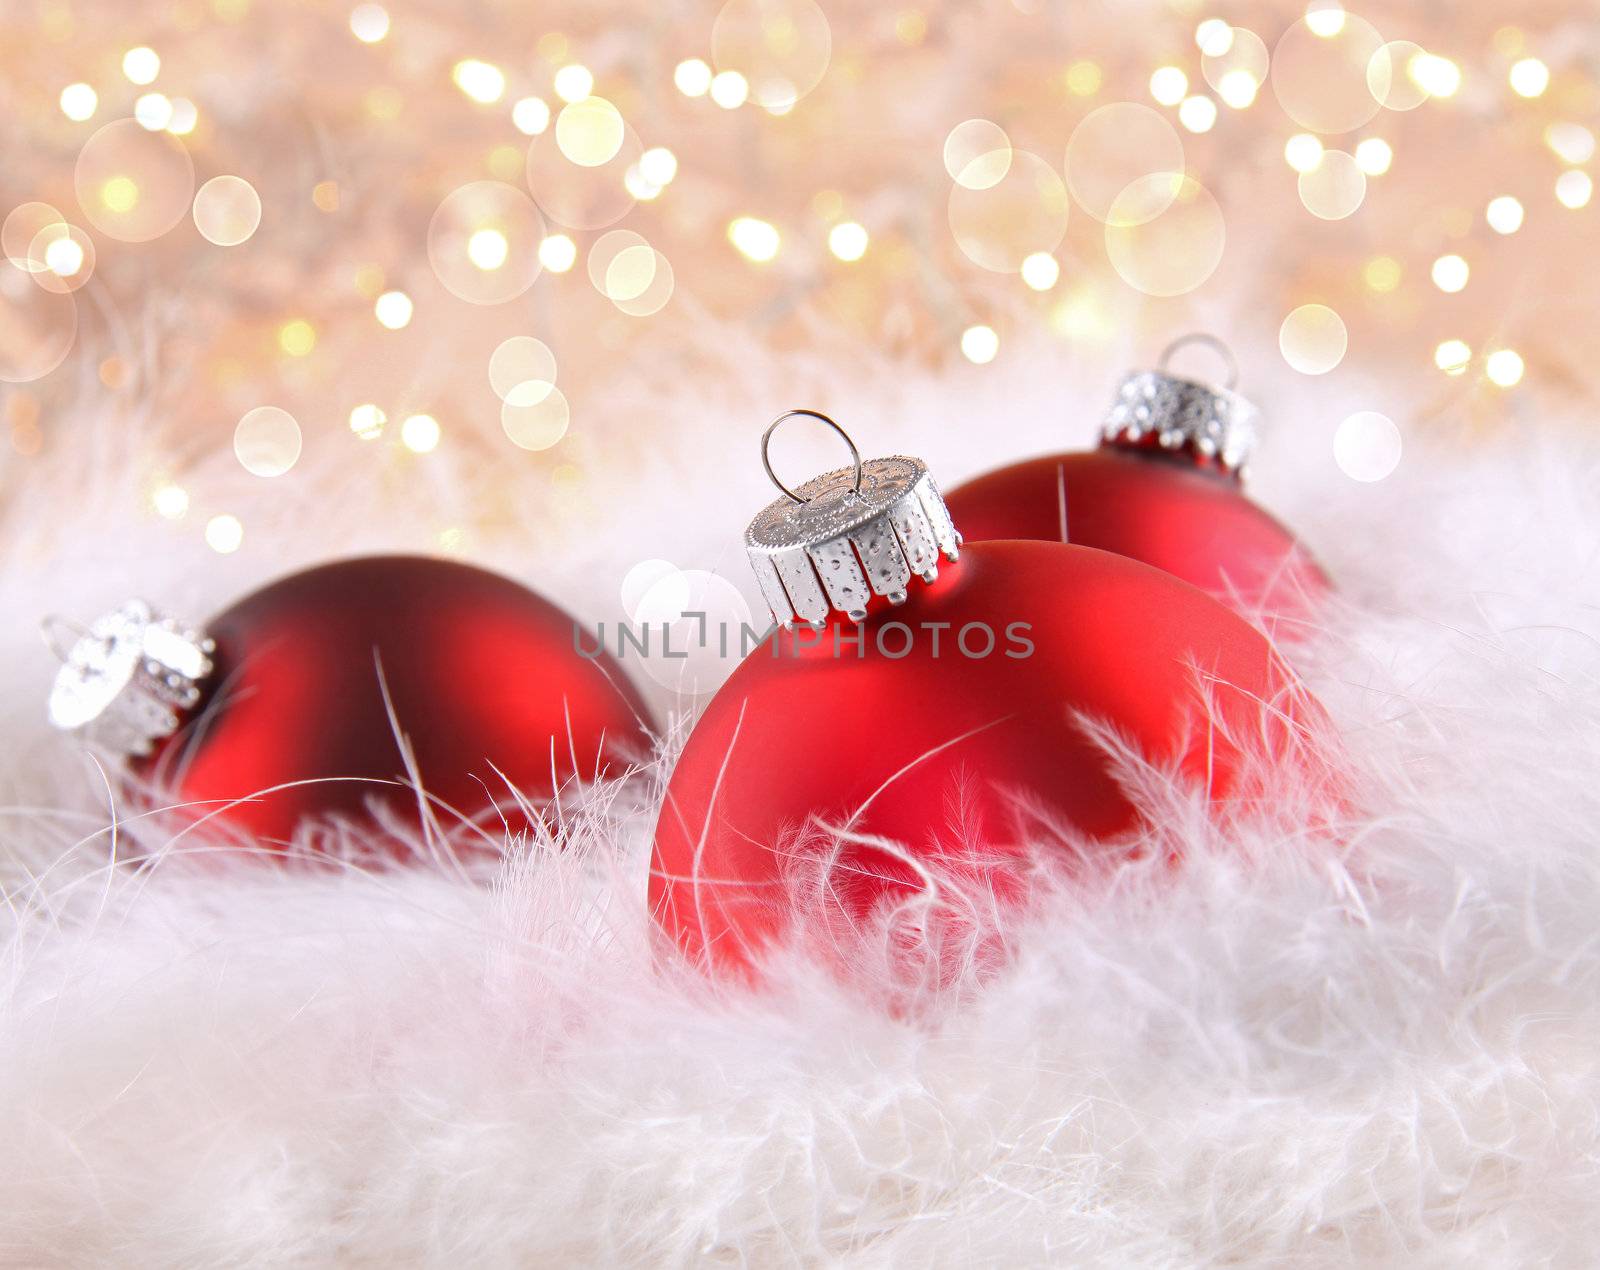 Red christmas balls with abstract light background